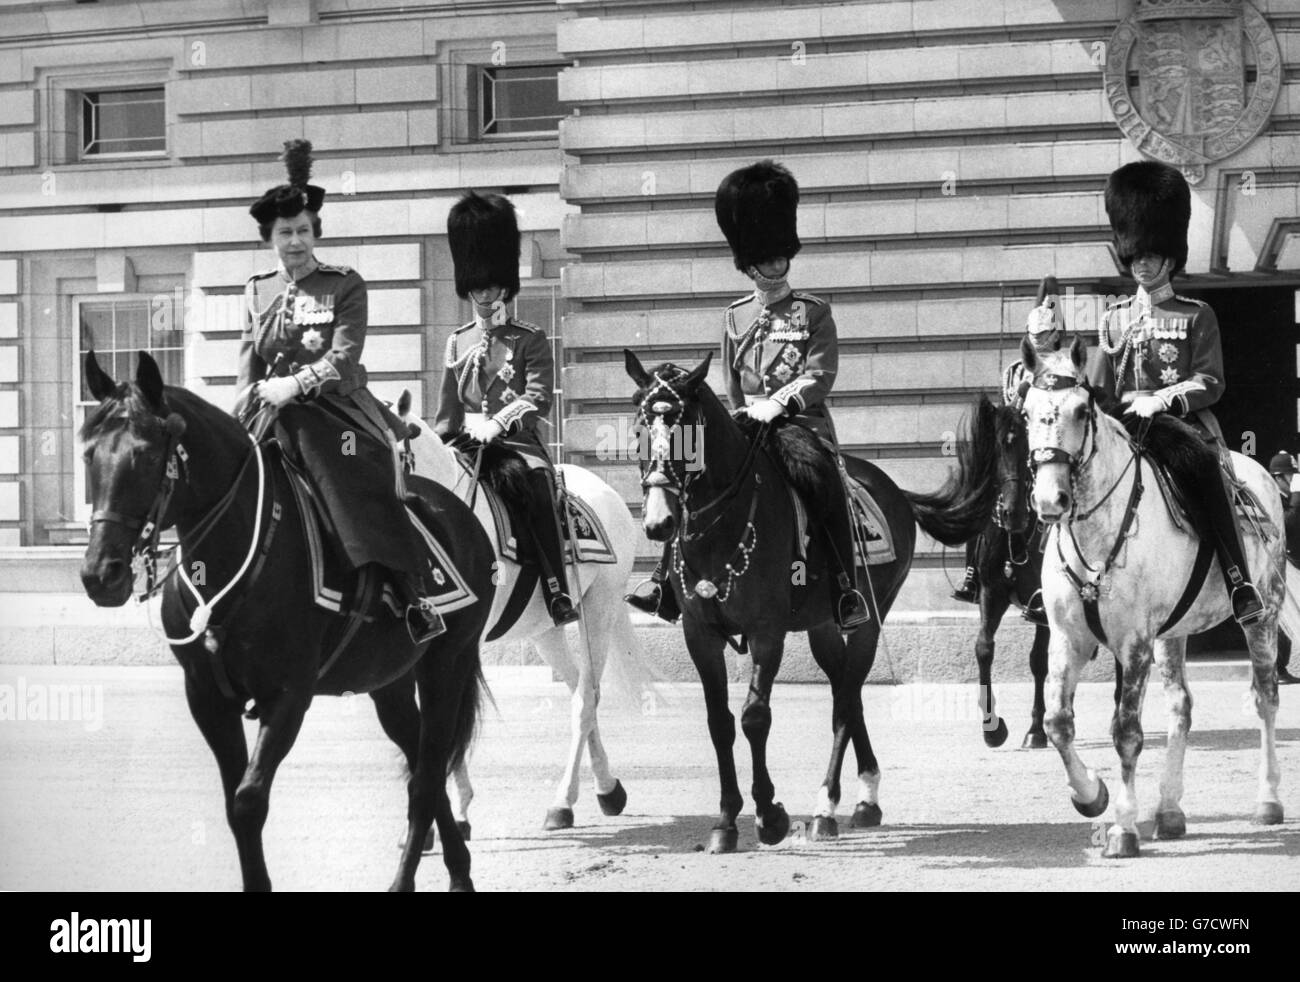 Queen Elizabeth II, in the uniform of Colonel-in-Chief Coldstream Guards, rides side-saddle on the black mare Burmese as she leaves Buckingham Palace to take the salute at the Trooping the Colour ceremony on Horse Guards Parade. Accompanying her are (l-r) Prince Charles, Prince Philip and the Duke of Kent. *Scan from print. Hi-res version available on request* Stock Photo